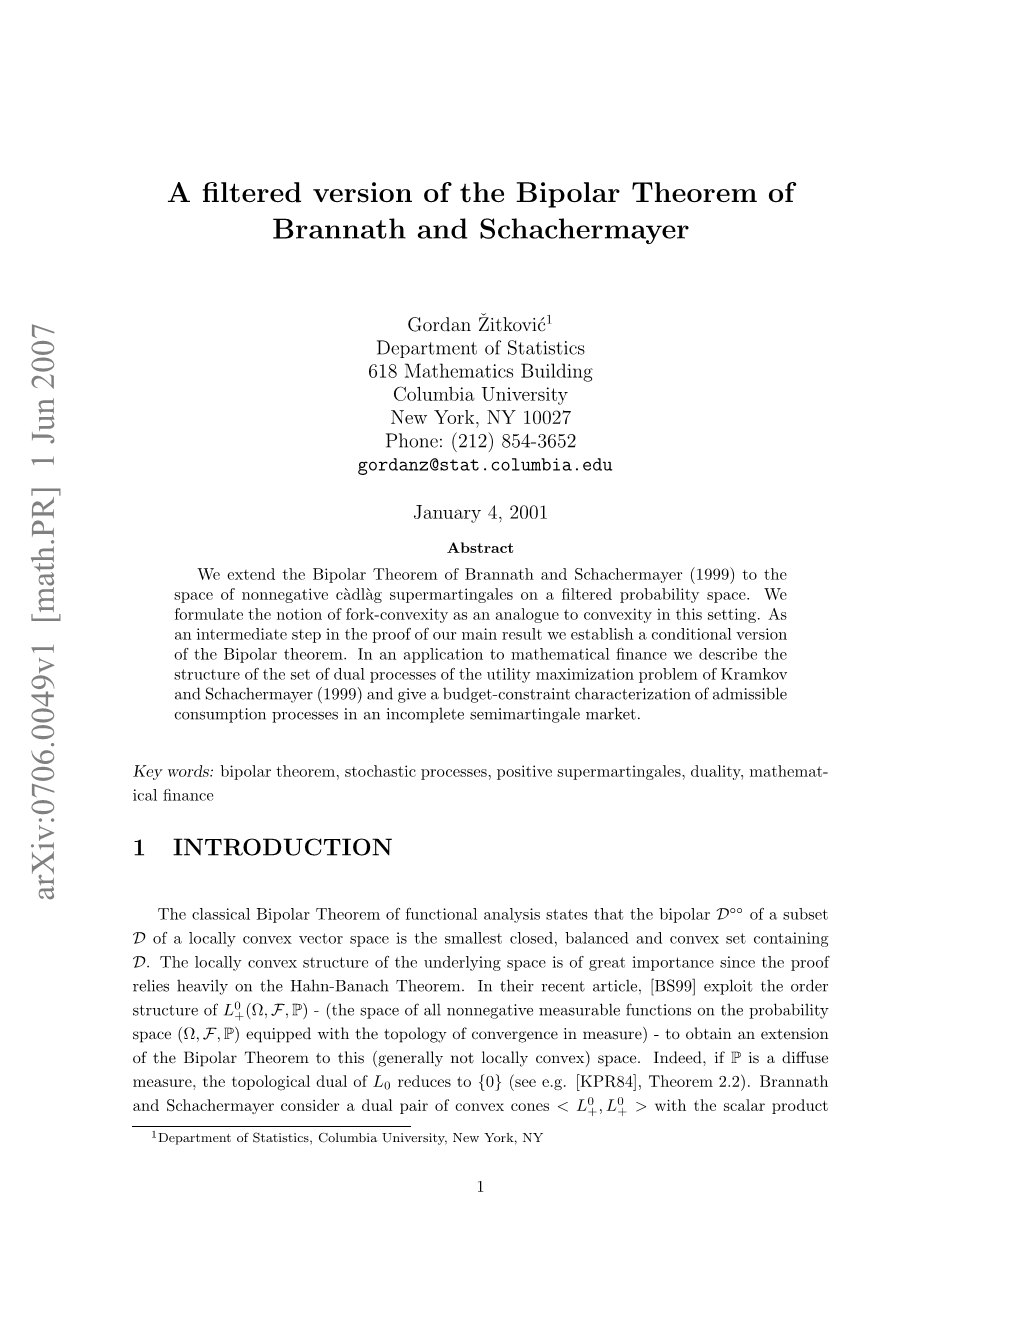 A Filtered Version of the Bipolar Theorem of Brannath And